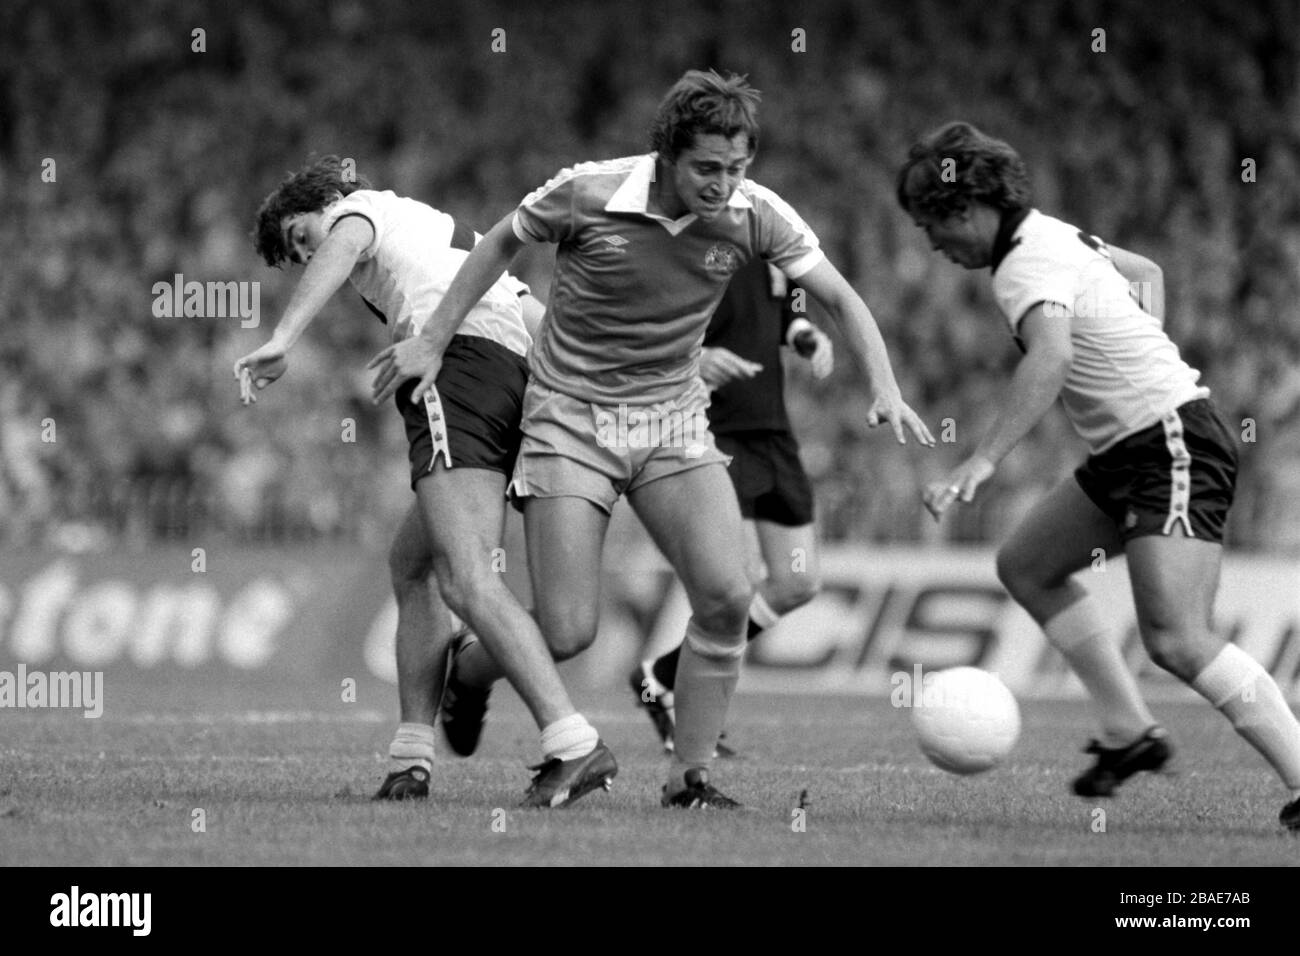 Manchester City's Michael Robinson (c) loses the ball to Crystal Palace's Kenny Sansom (r) after dispossessing Jerry Murphy (l) Stock Photo